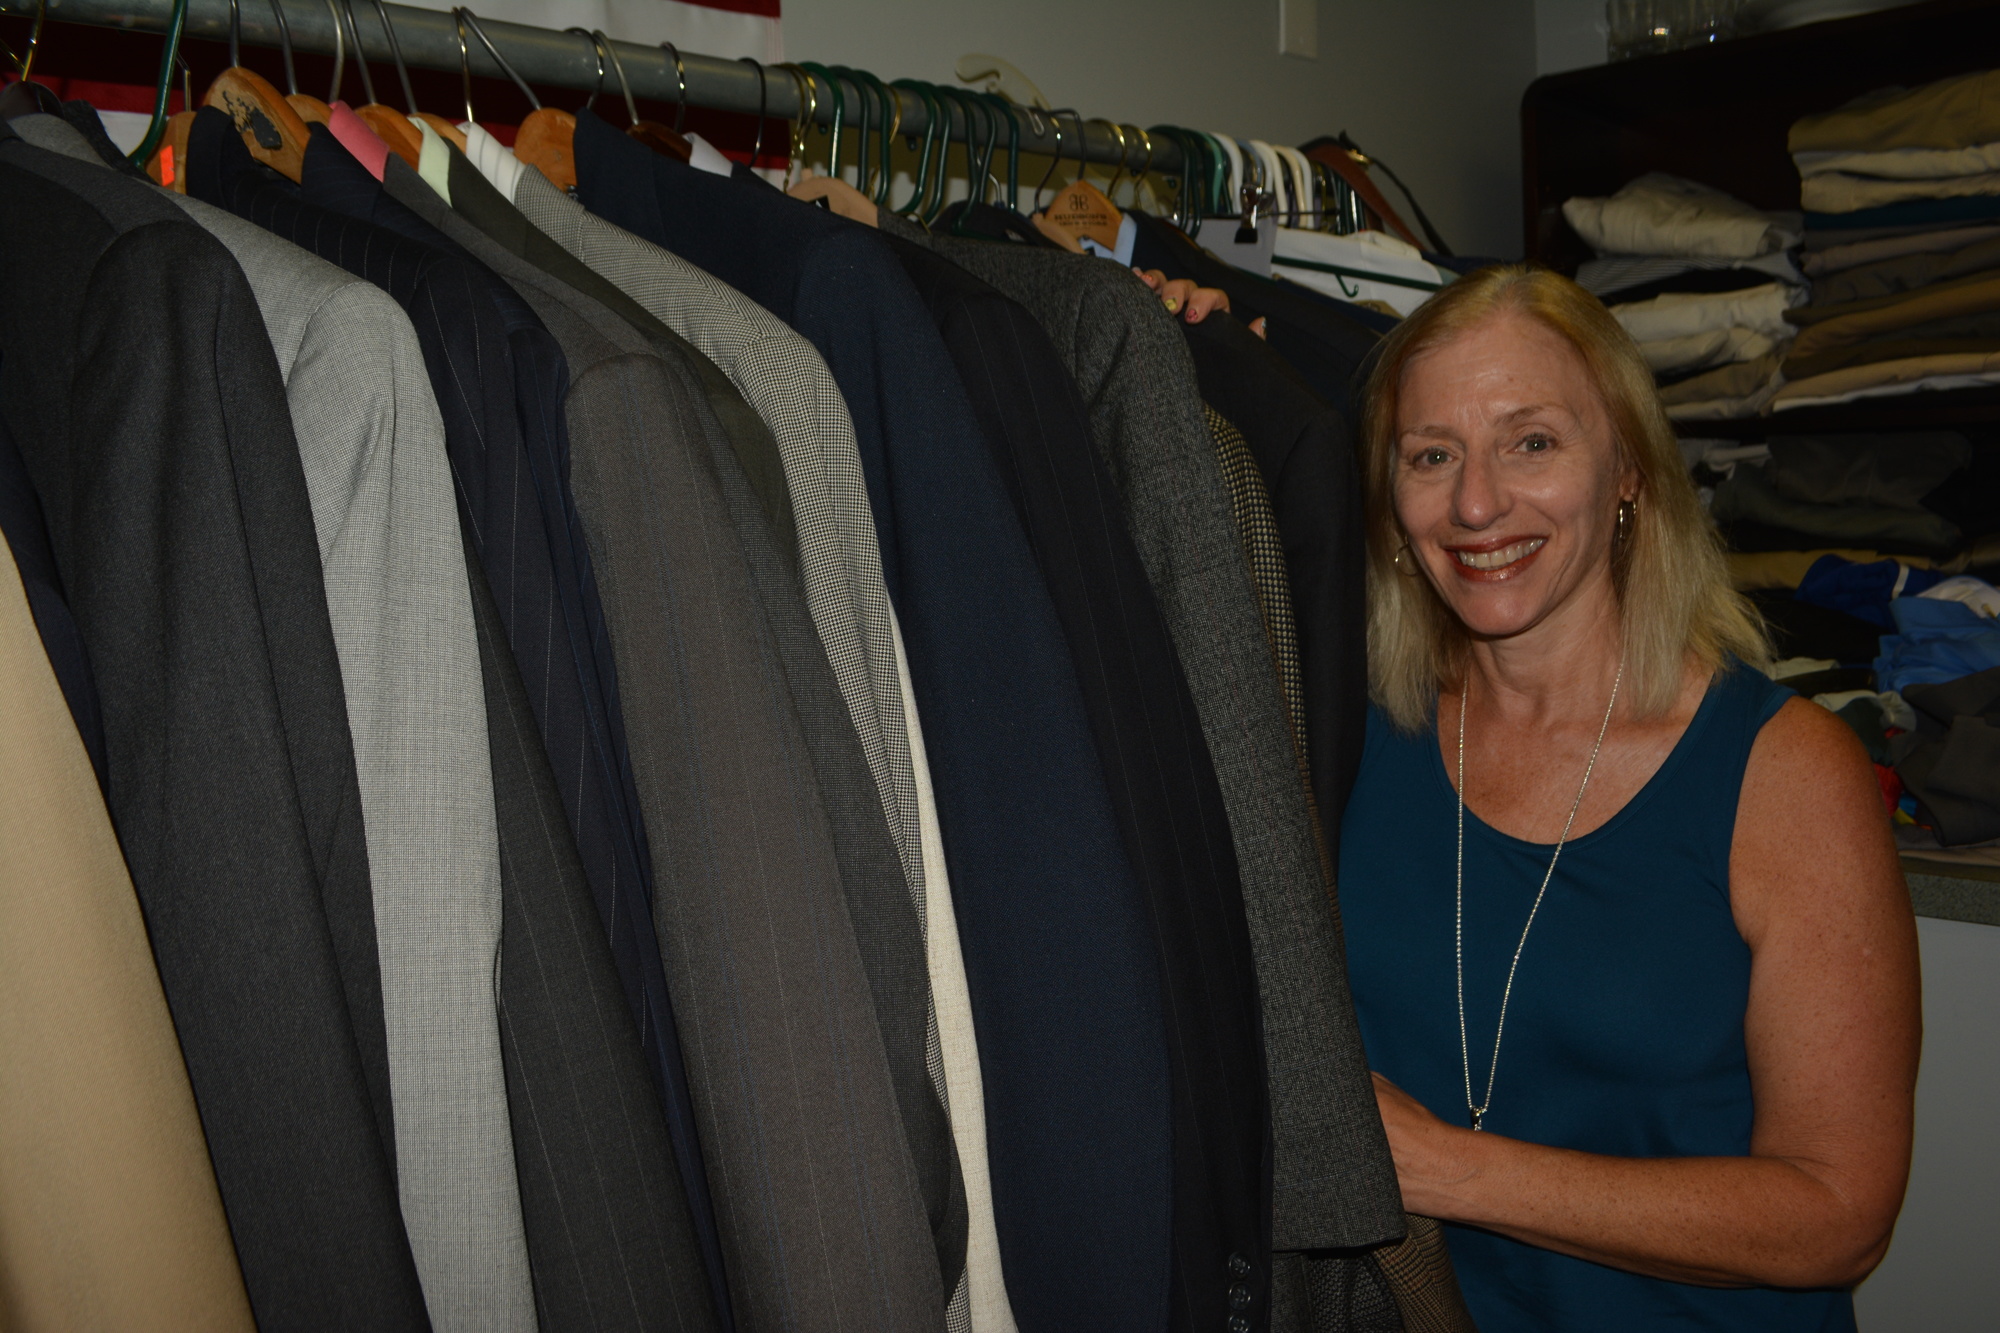 Elaine Mellon said she had collected about 70 suits in just two weeks.